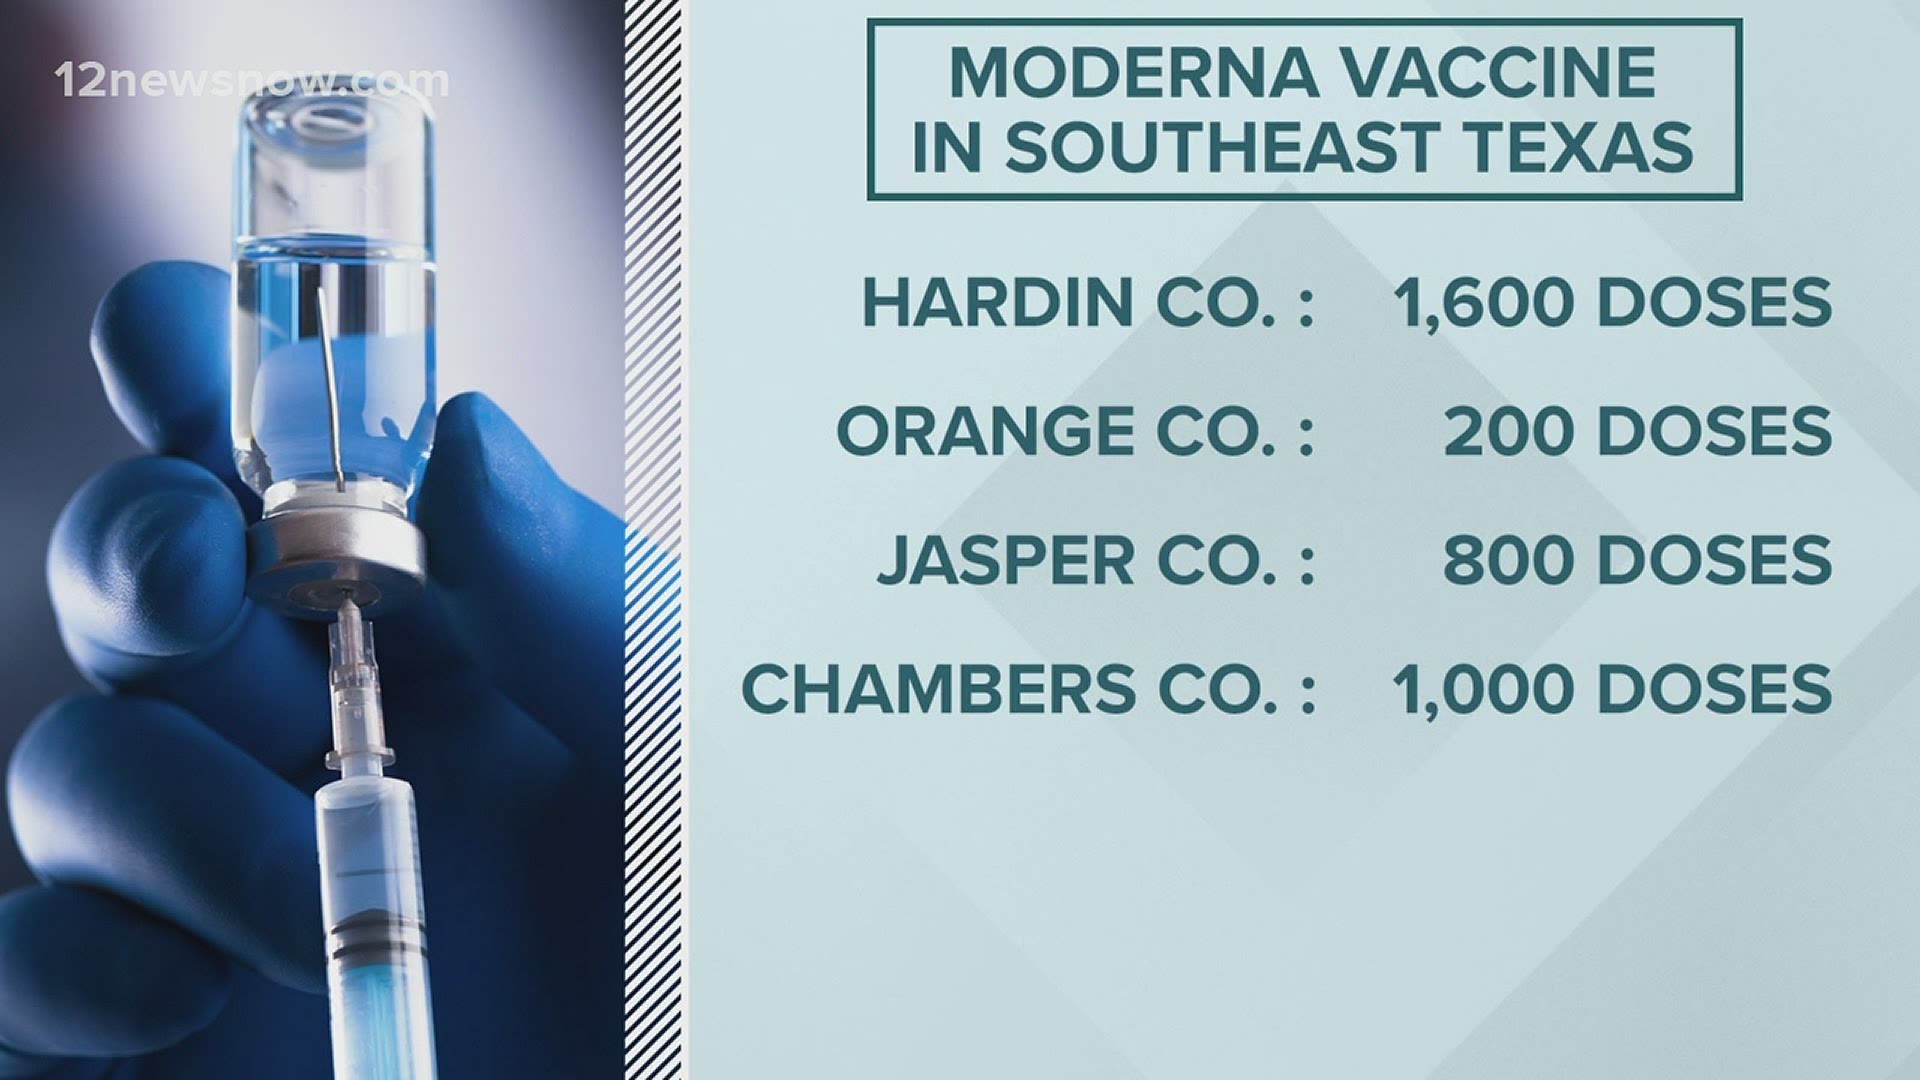 Hardin County has already received 1,600 doses of the vaccine